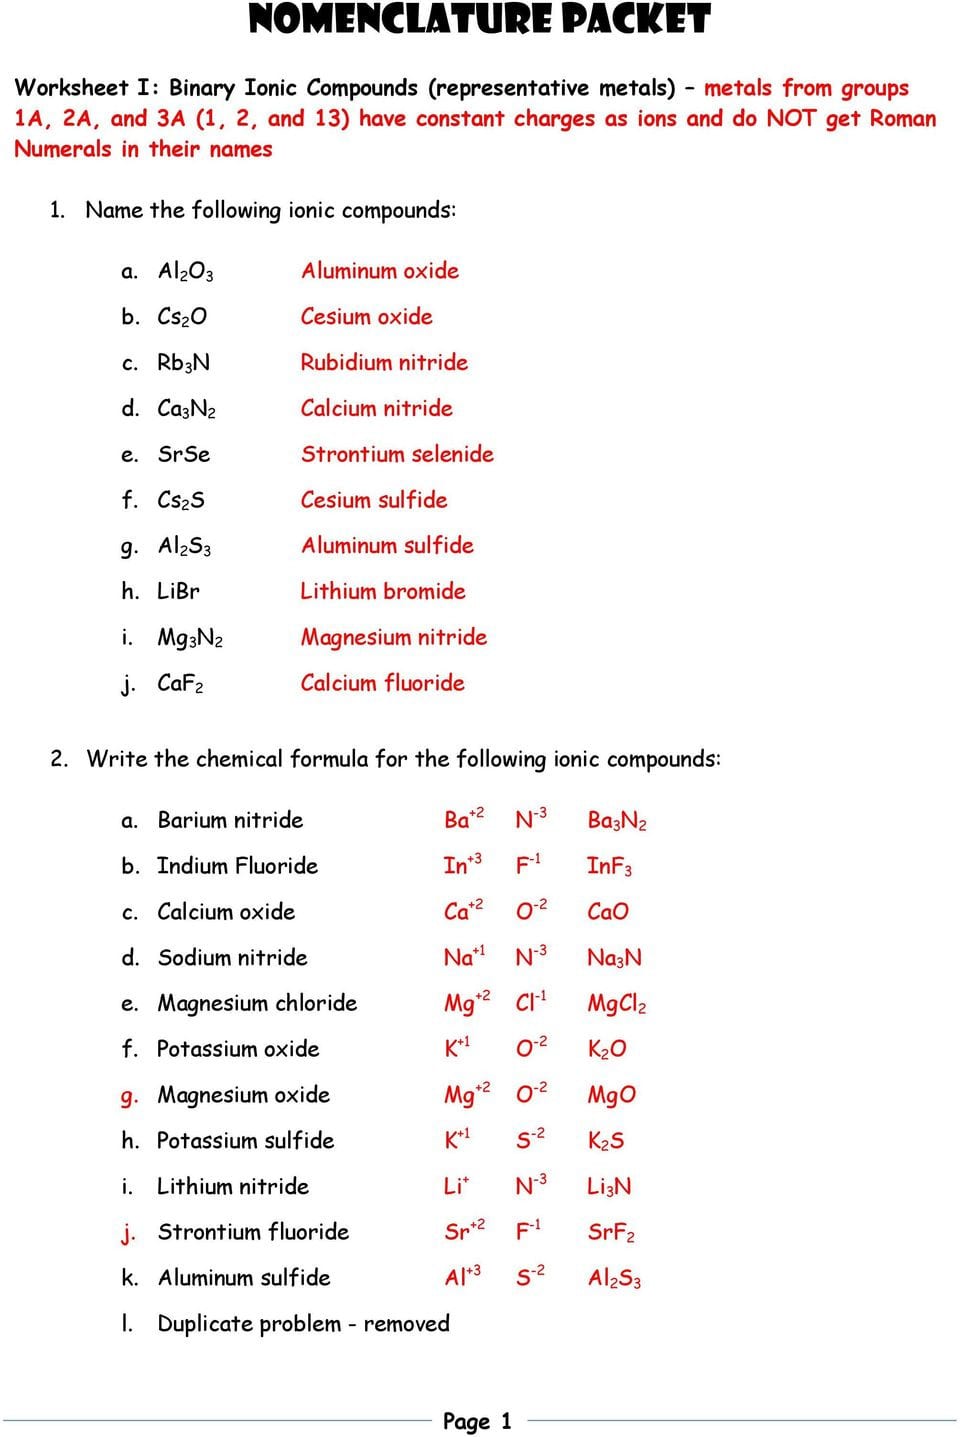 chemical-formulas-and-names-of-ionic-compounds-worksheet-db-excel